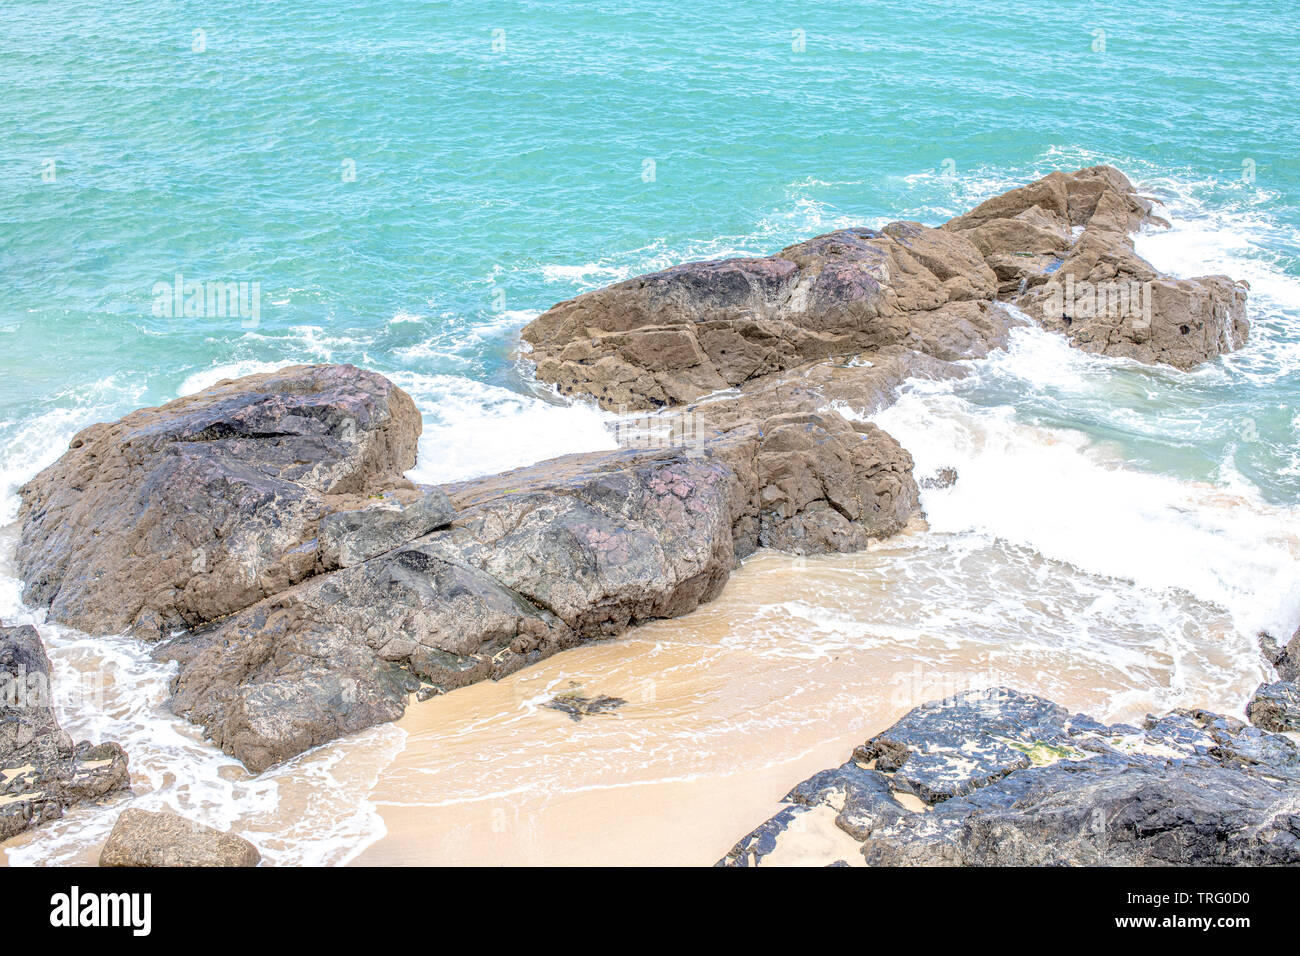 Images of rocks with waves crashing on a beach at St Ives in Cornwall UK Stock Photo